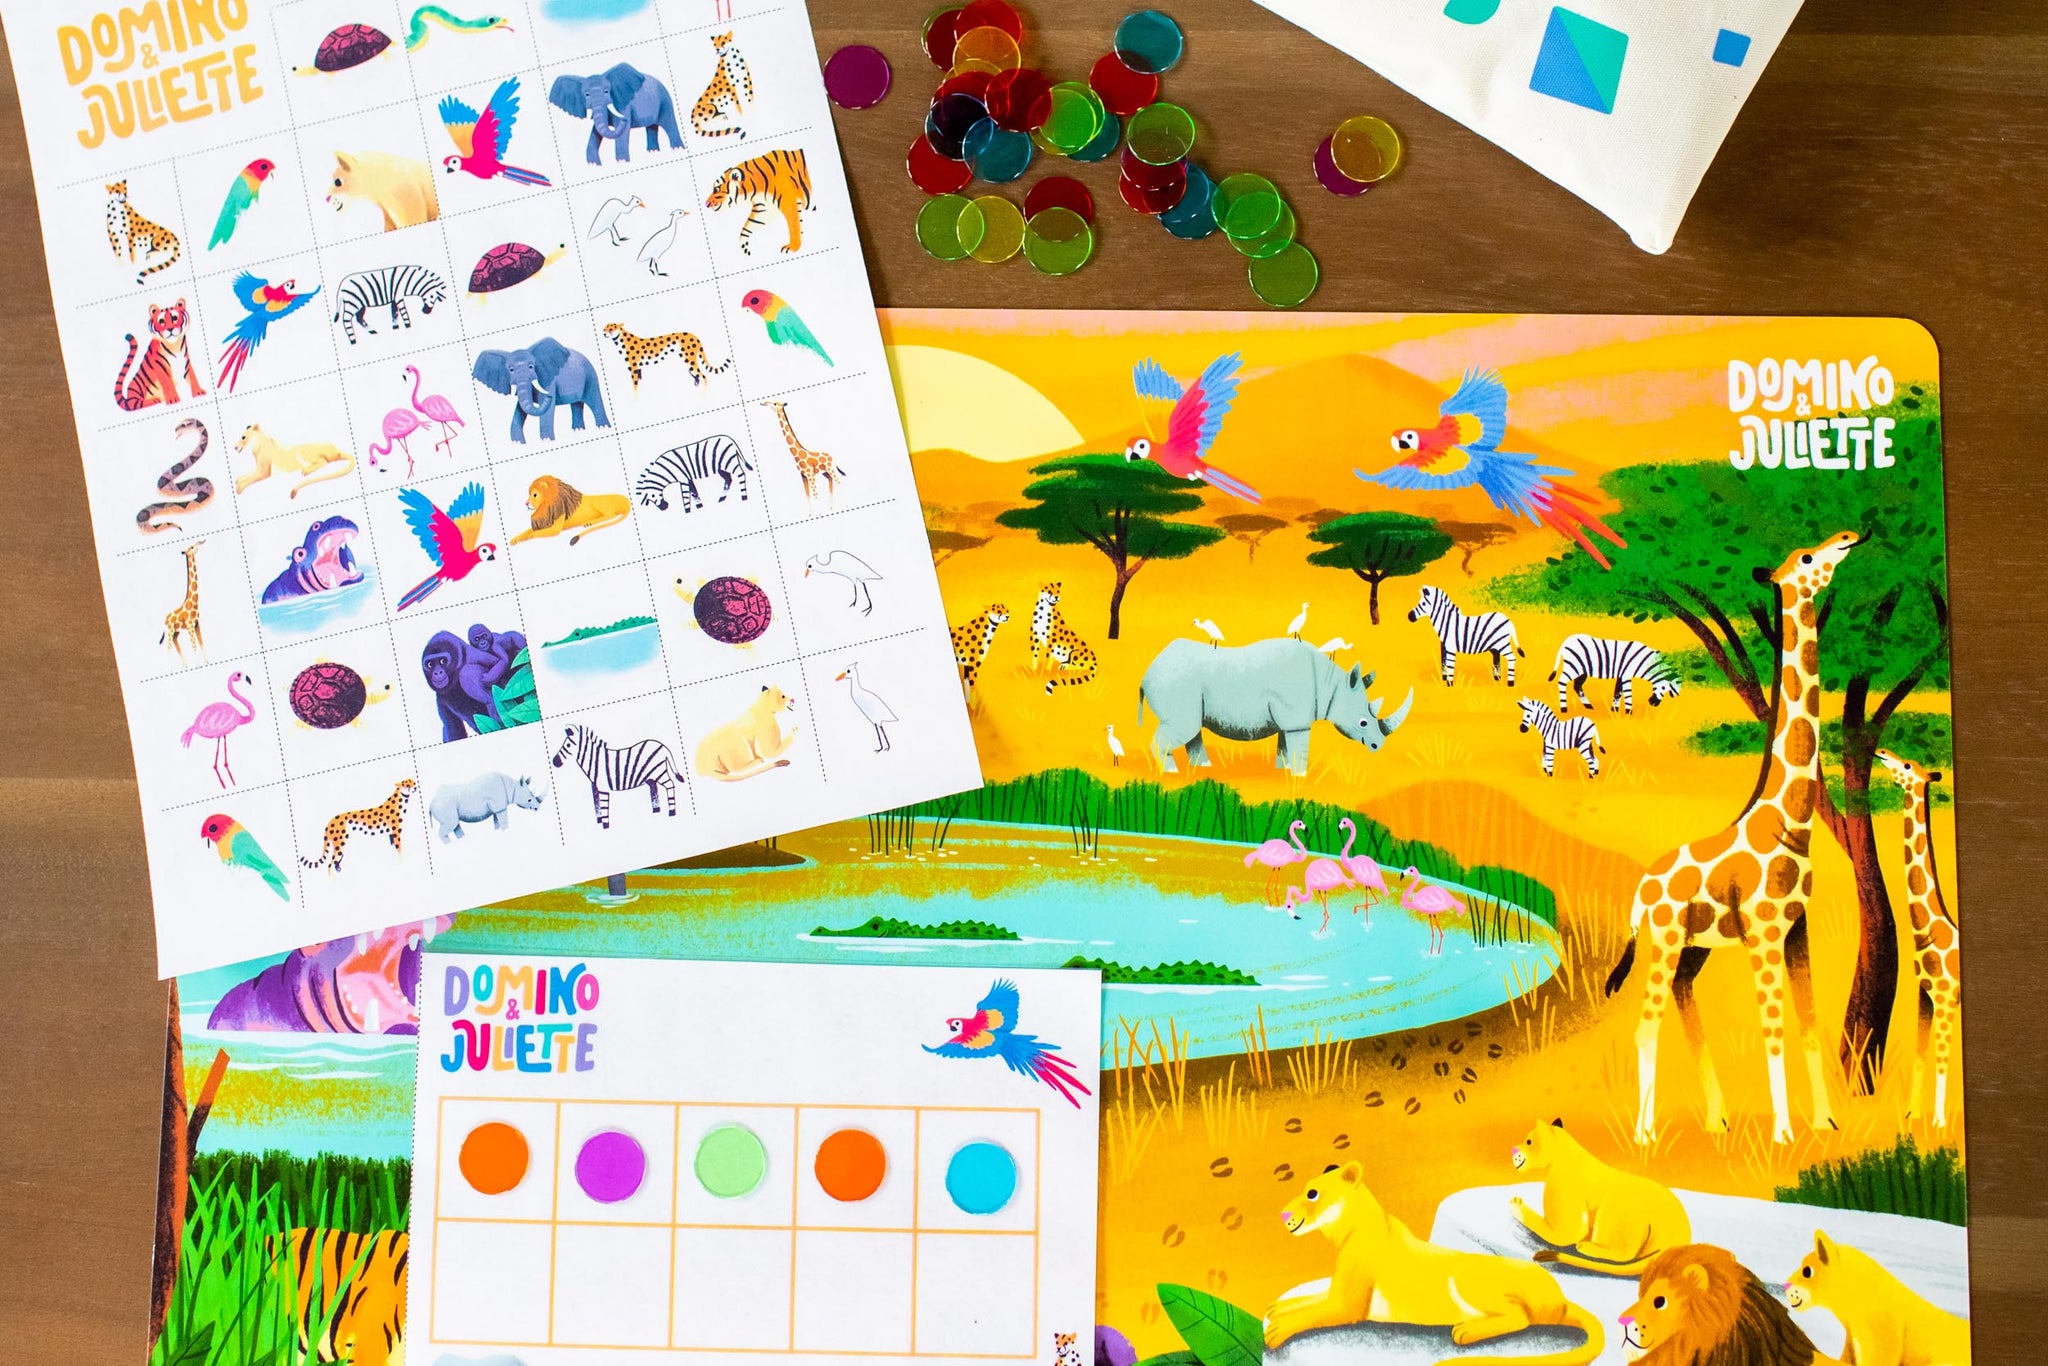 Safari placemat with playful illustrations for language development and early math skills, Safari Placemats, Scenic Safari placemat, Make mealtime fun and educational with this safari-themed placemat, Encourage imaginative play with this colorful Safari placemat, Scenic Safari placemat with simple learning prompts for cognitive development, Fun and educational activities to keep children entertained and engaged on the Safari placemat